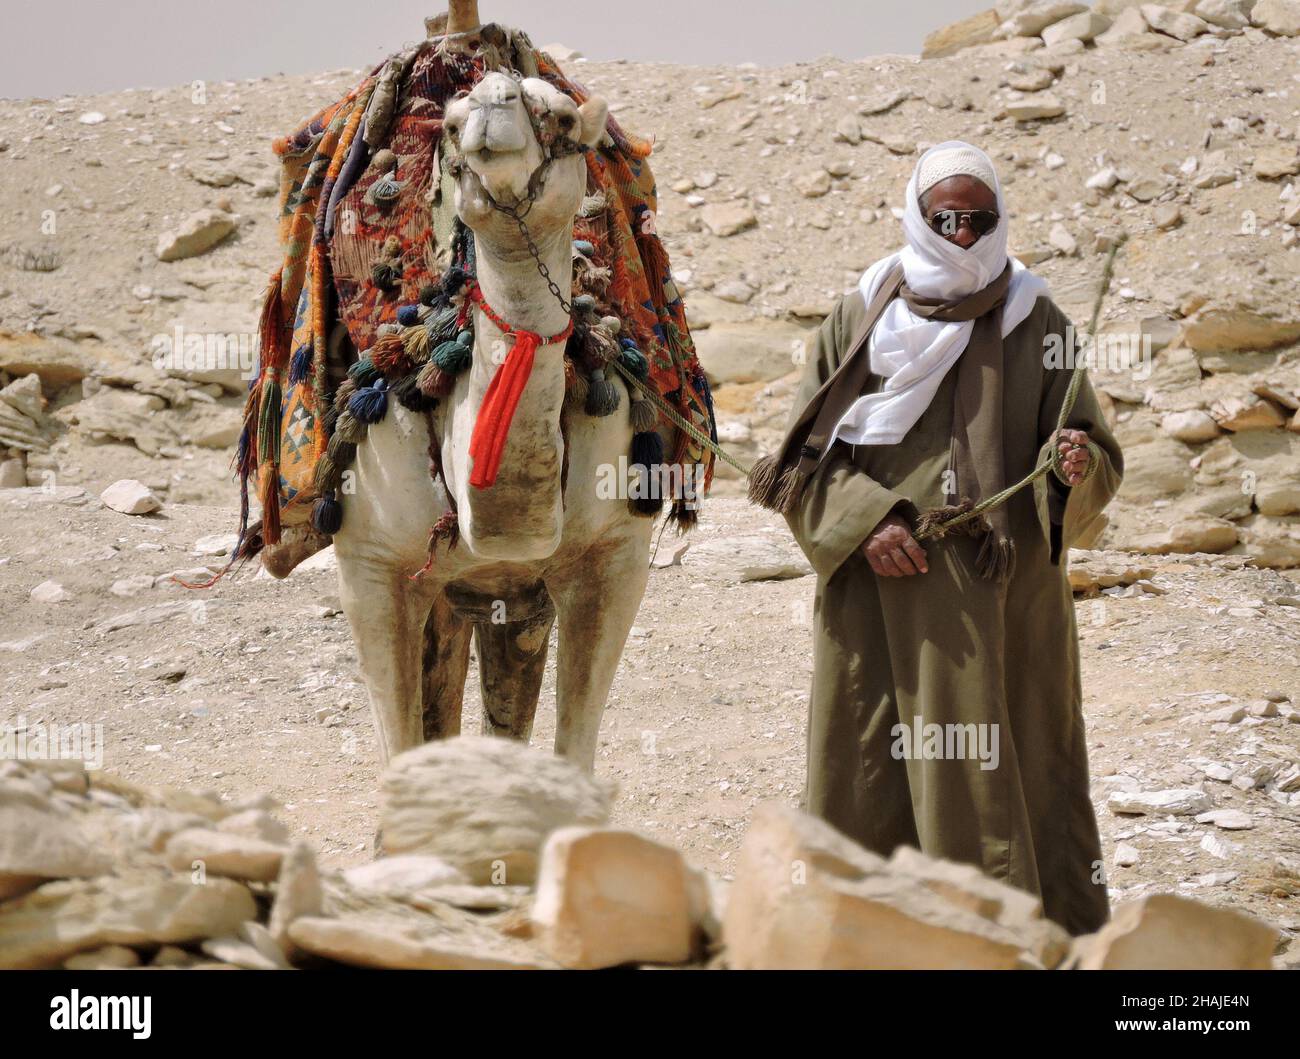 Badrshein, Egypt - March 25 2015 - An Egyptian camel driver and his camel. The pack is very colorful. The camel looks headstrong Stock Photo